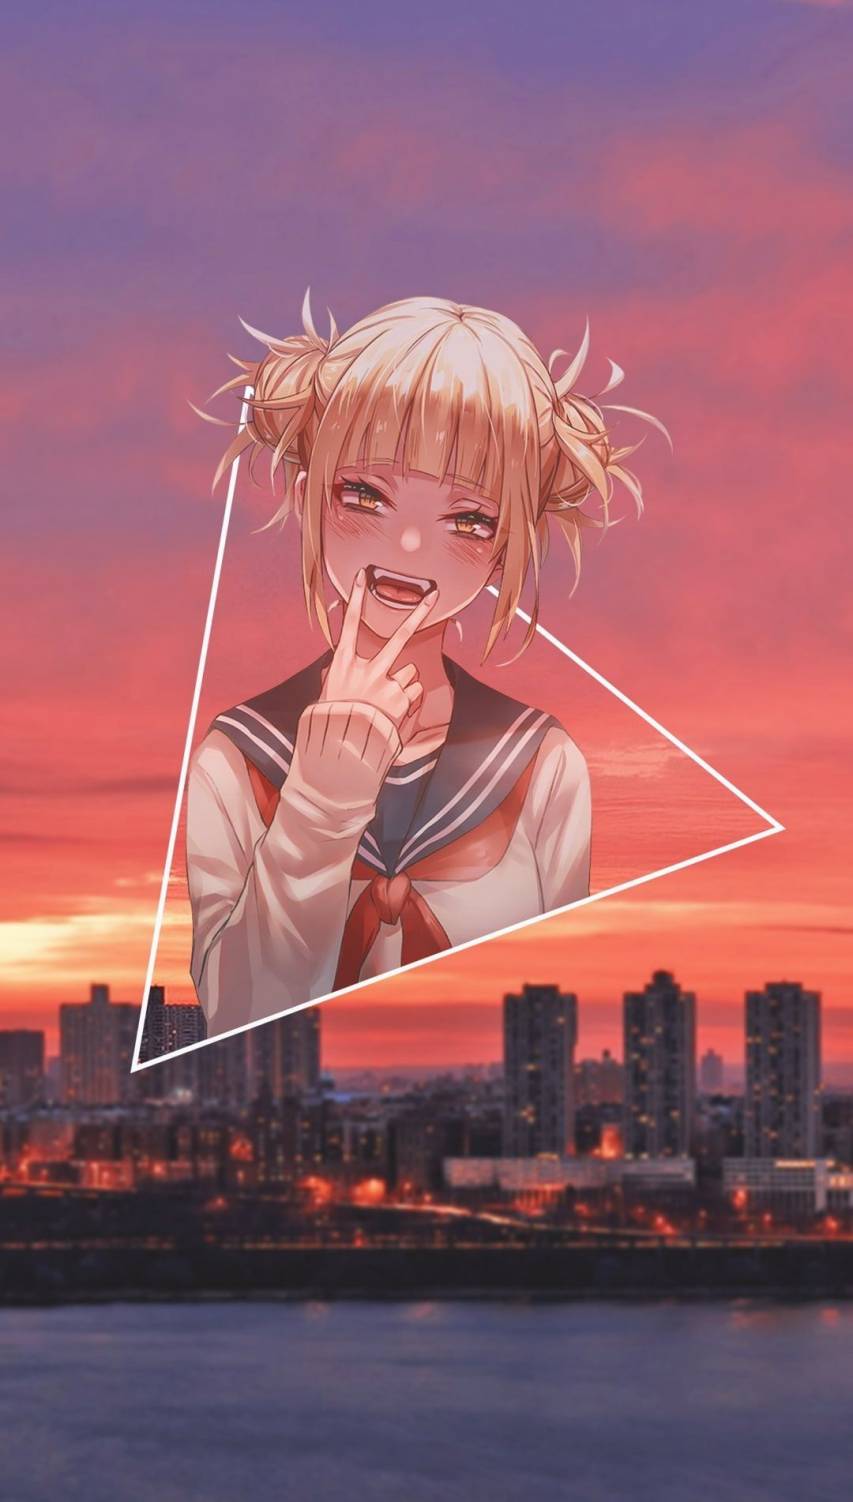 Aesthetic Anime Phone Wallpapers And Background images